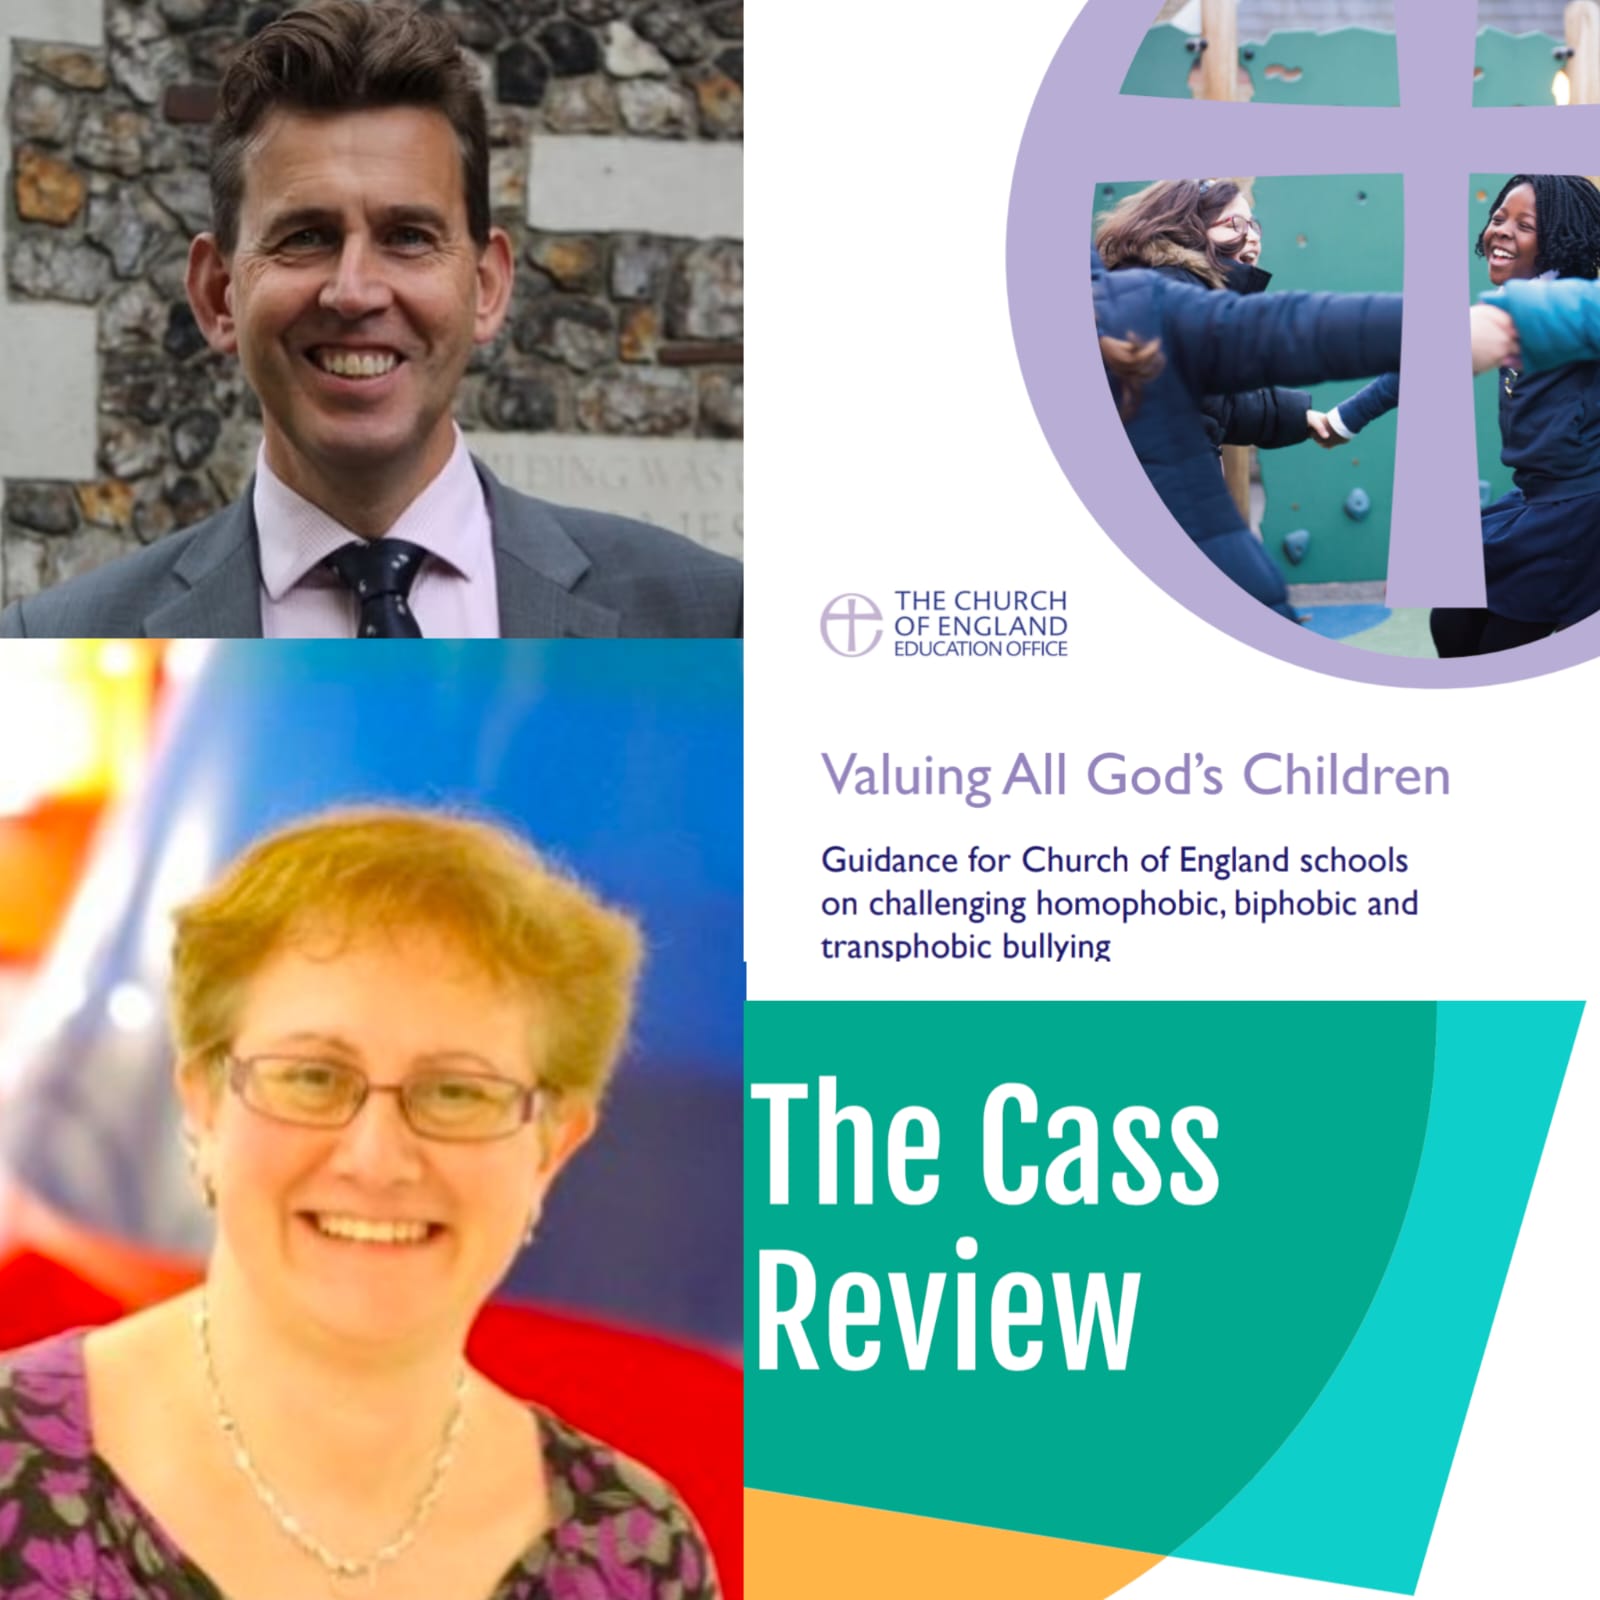 Image Featuring Rev Nigel Genders, Hilary Cass, The Cass Review Logo and cover of Valuing All God's Children Report